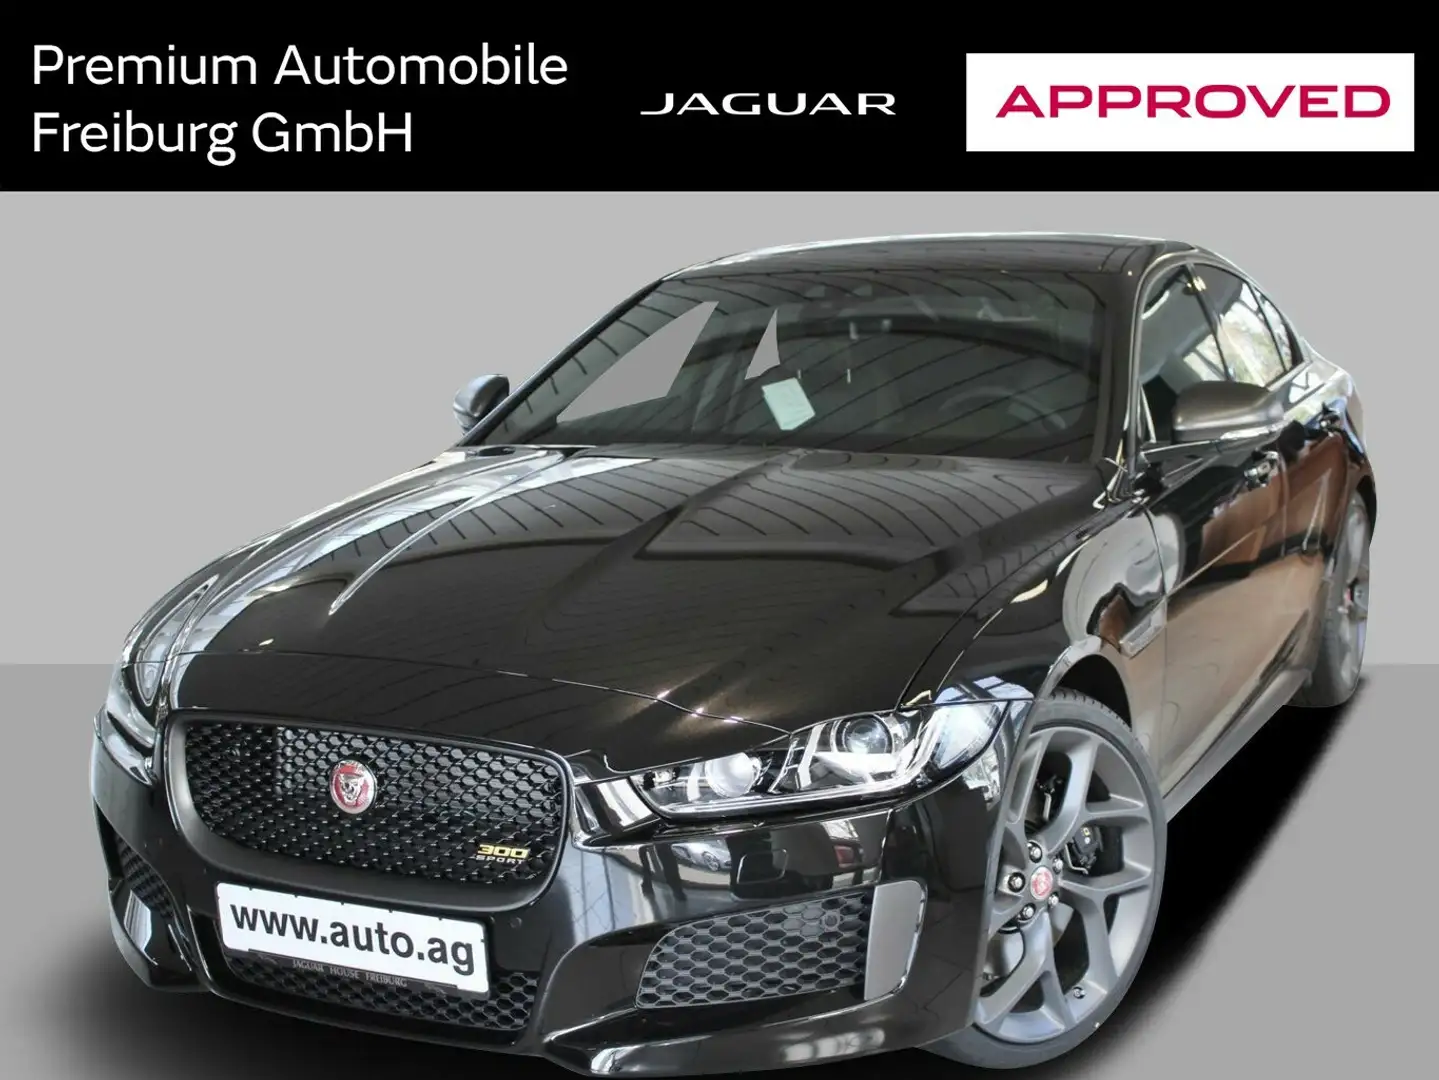 Jaguar XE 300 SPORT AWD MY19 APPROVED crna - 1